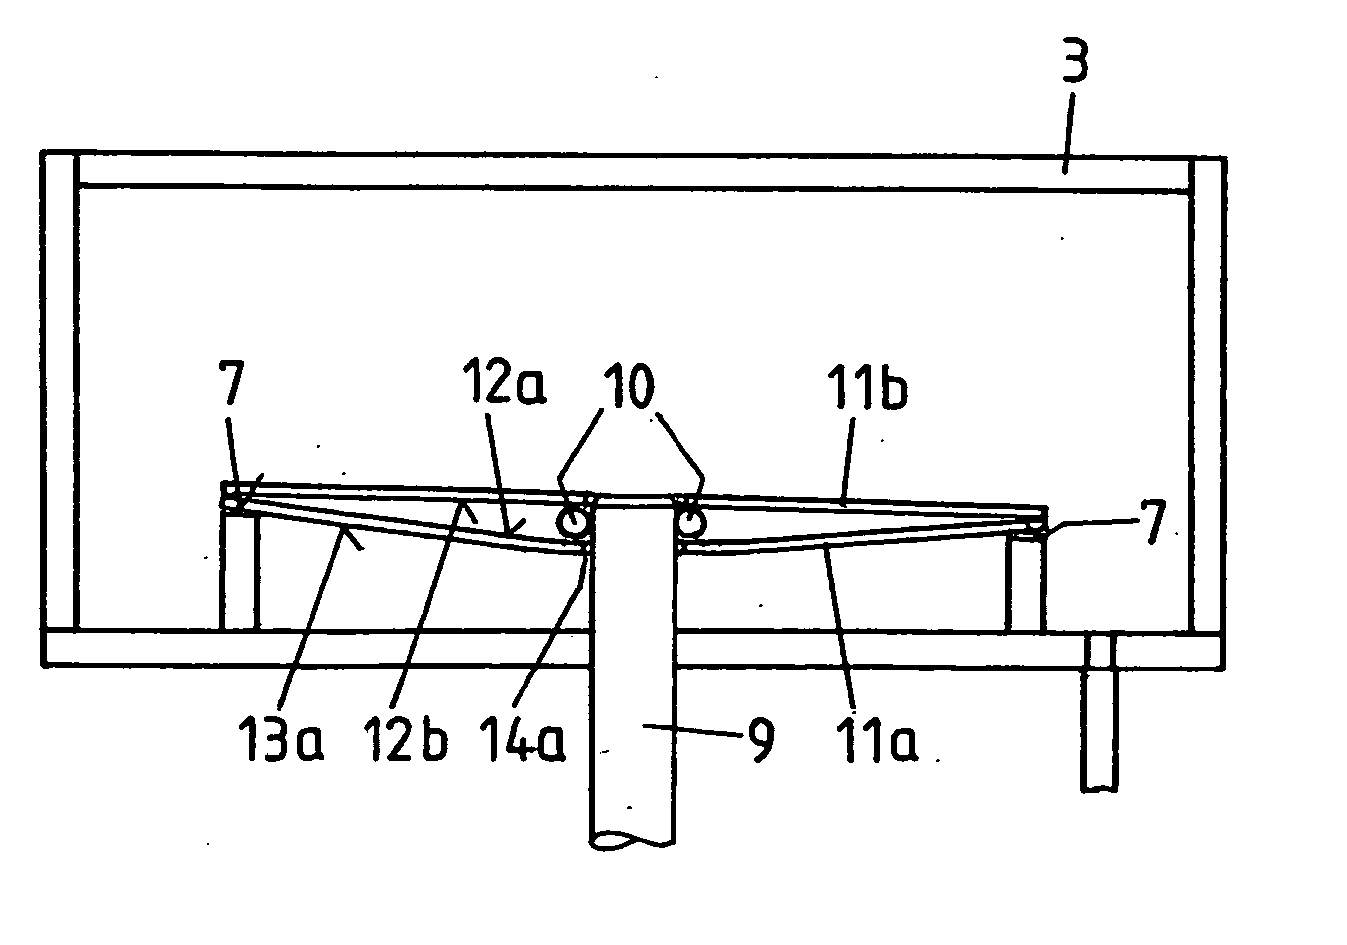 Method for the bonding of disk-shaped substrates and apparatus for carrying out the method